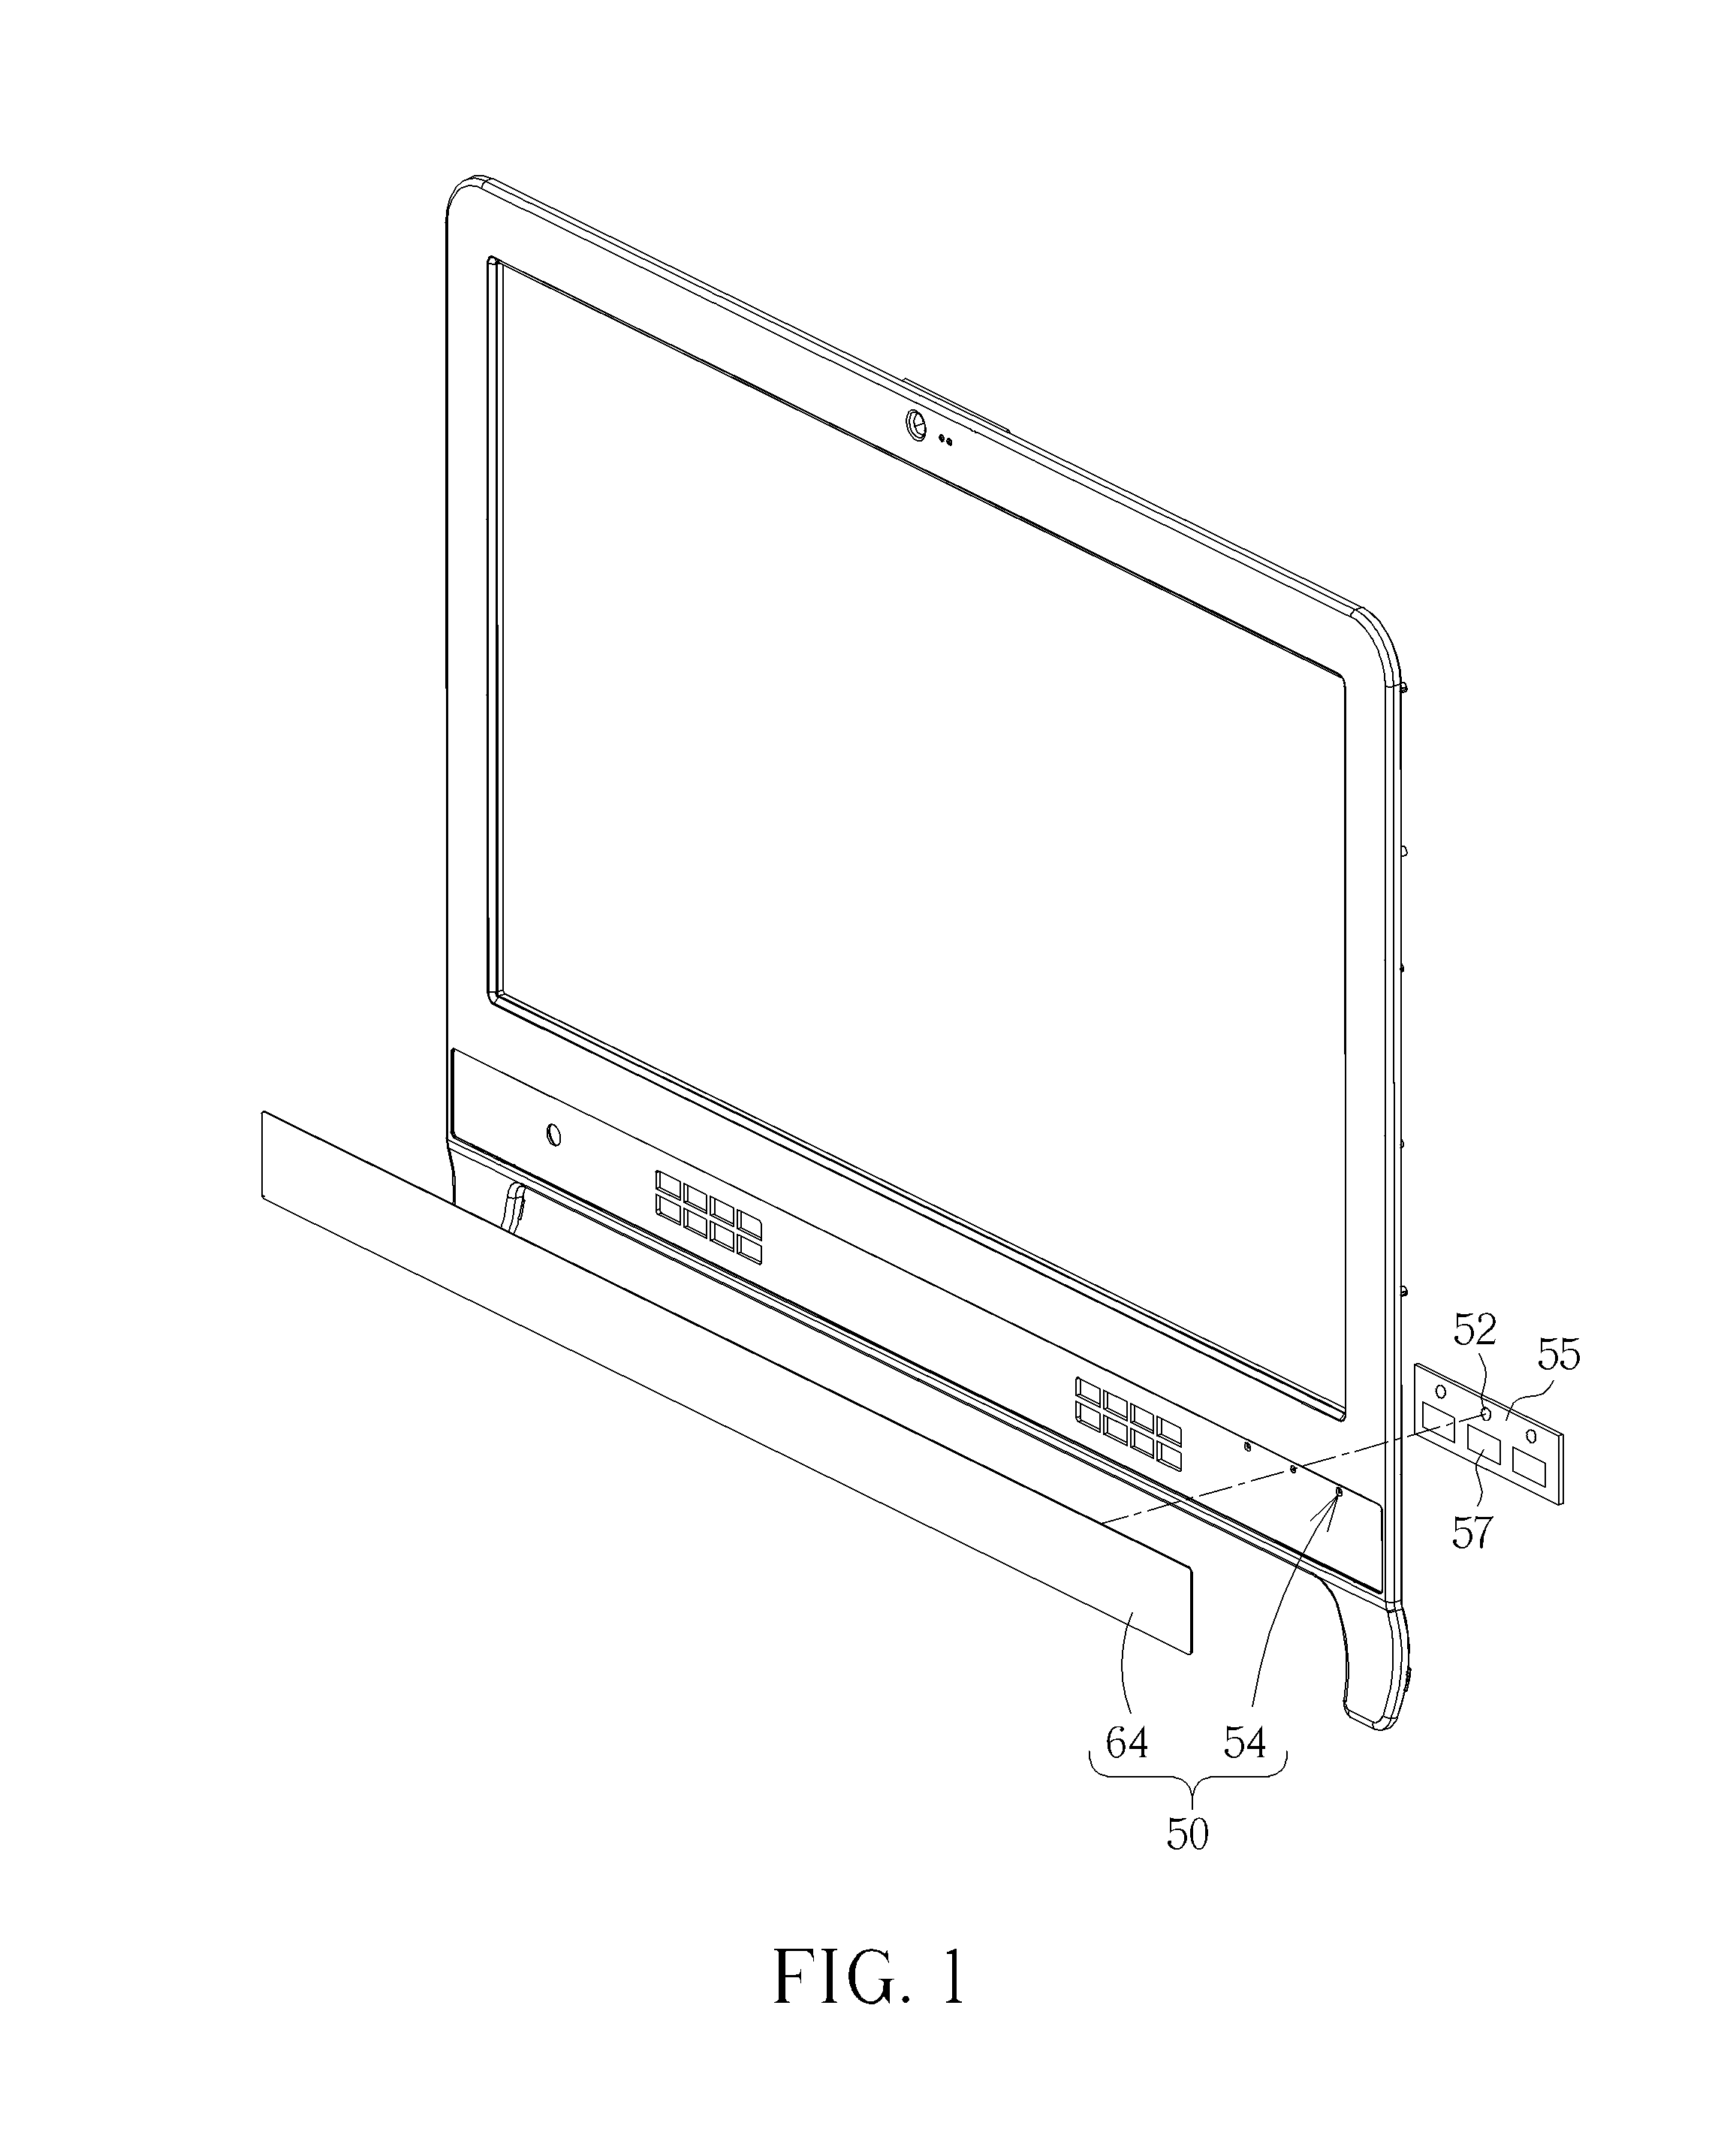 Light-emitting device with vignetting effect